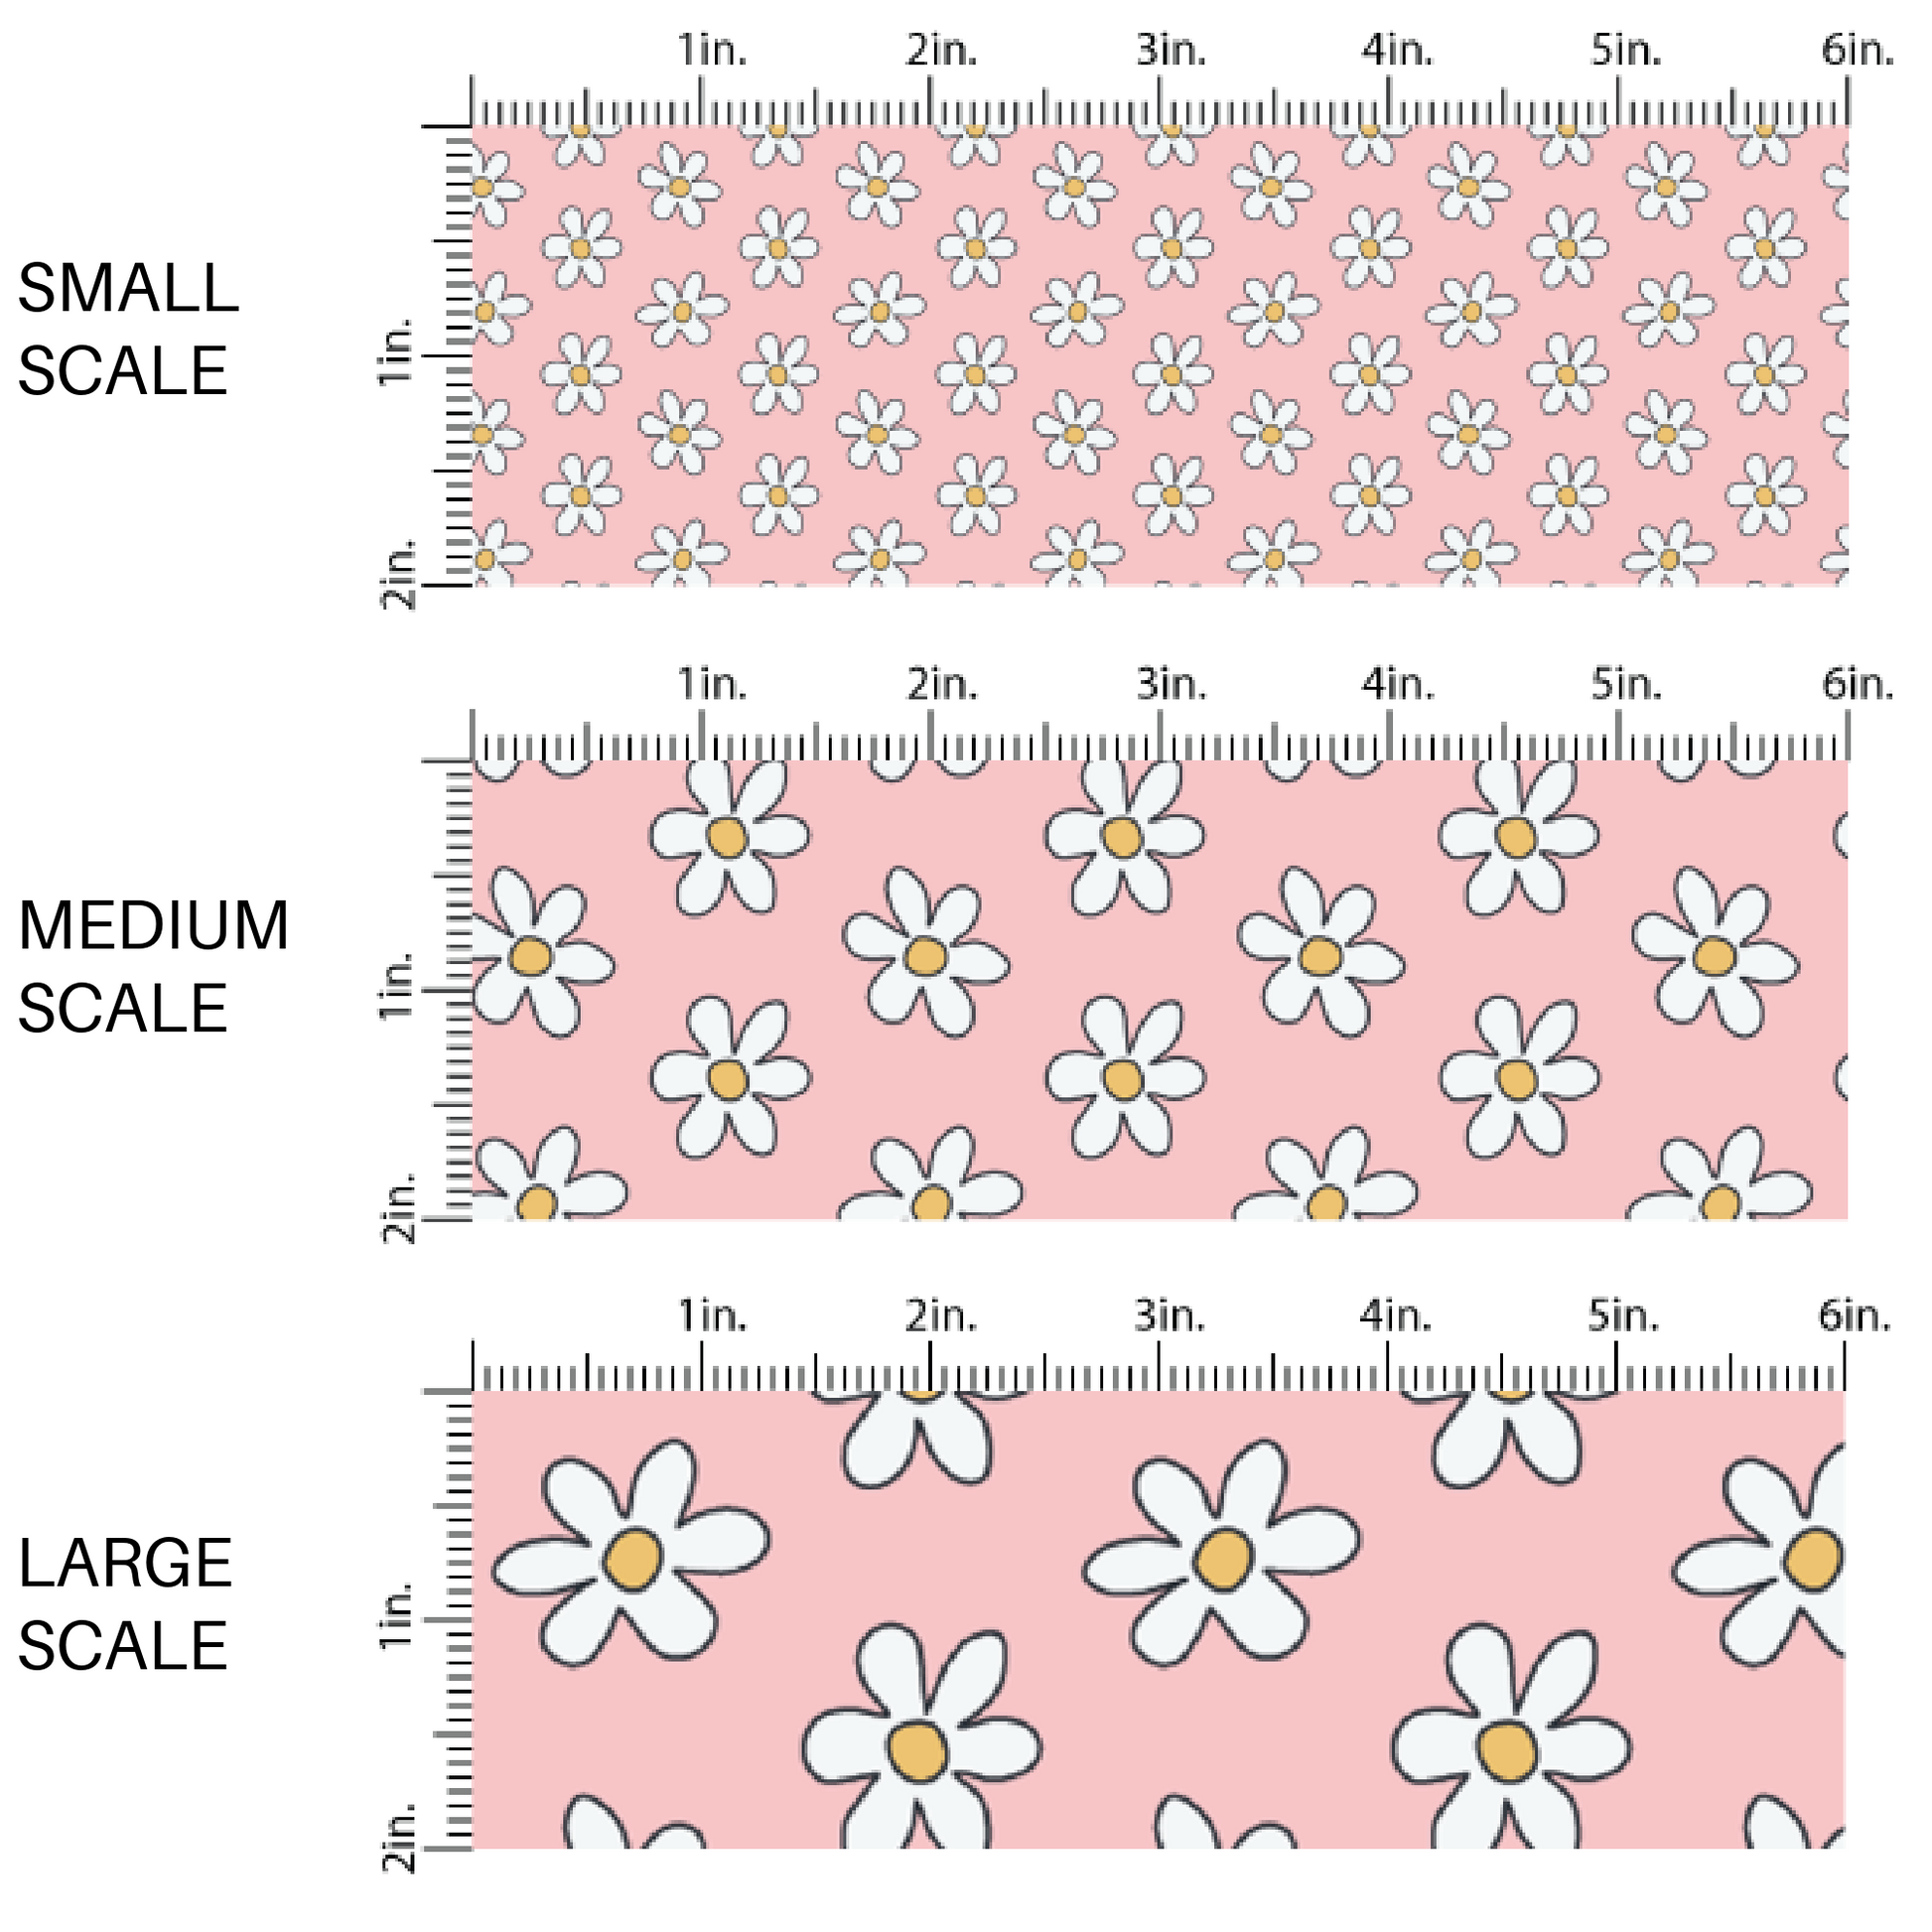 White daisies with yellow centers on pink fabric by the yard scaled image guide